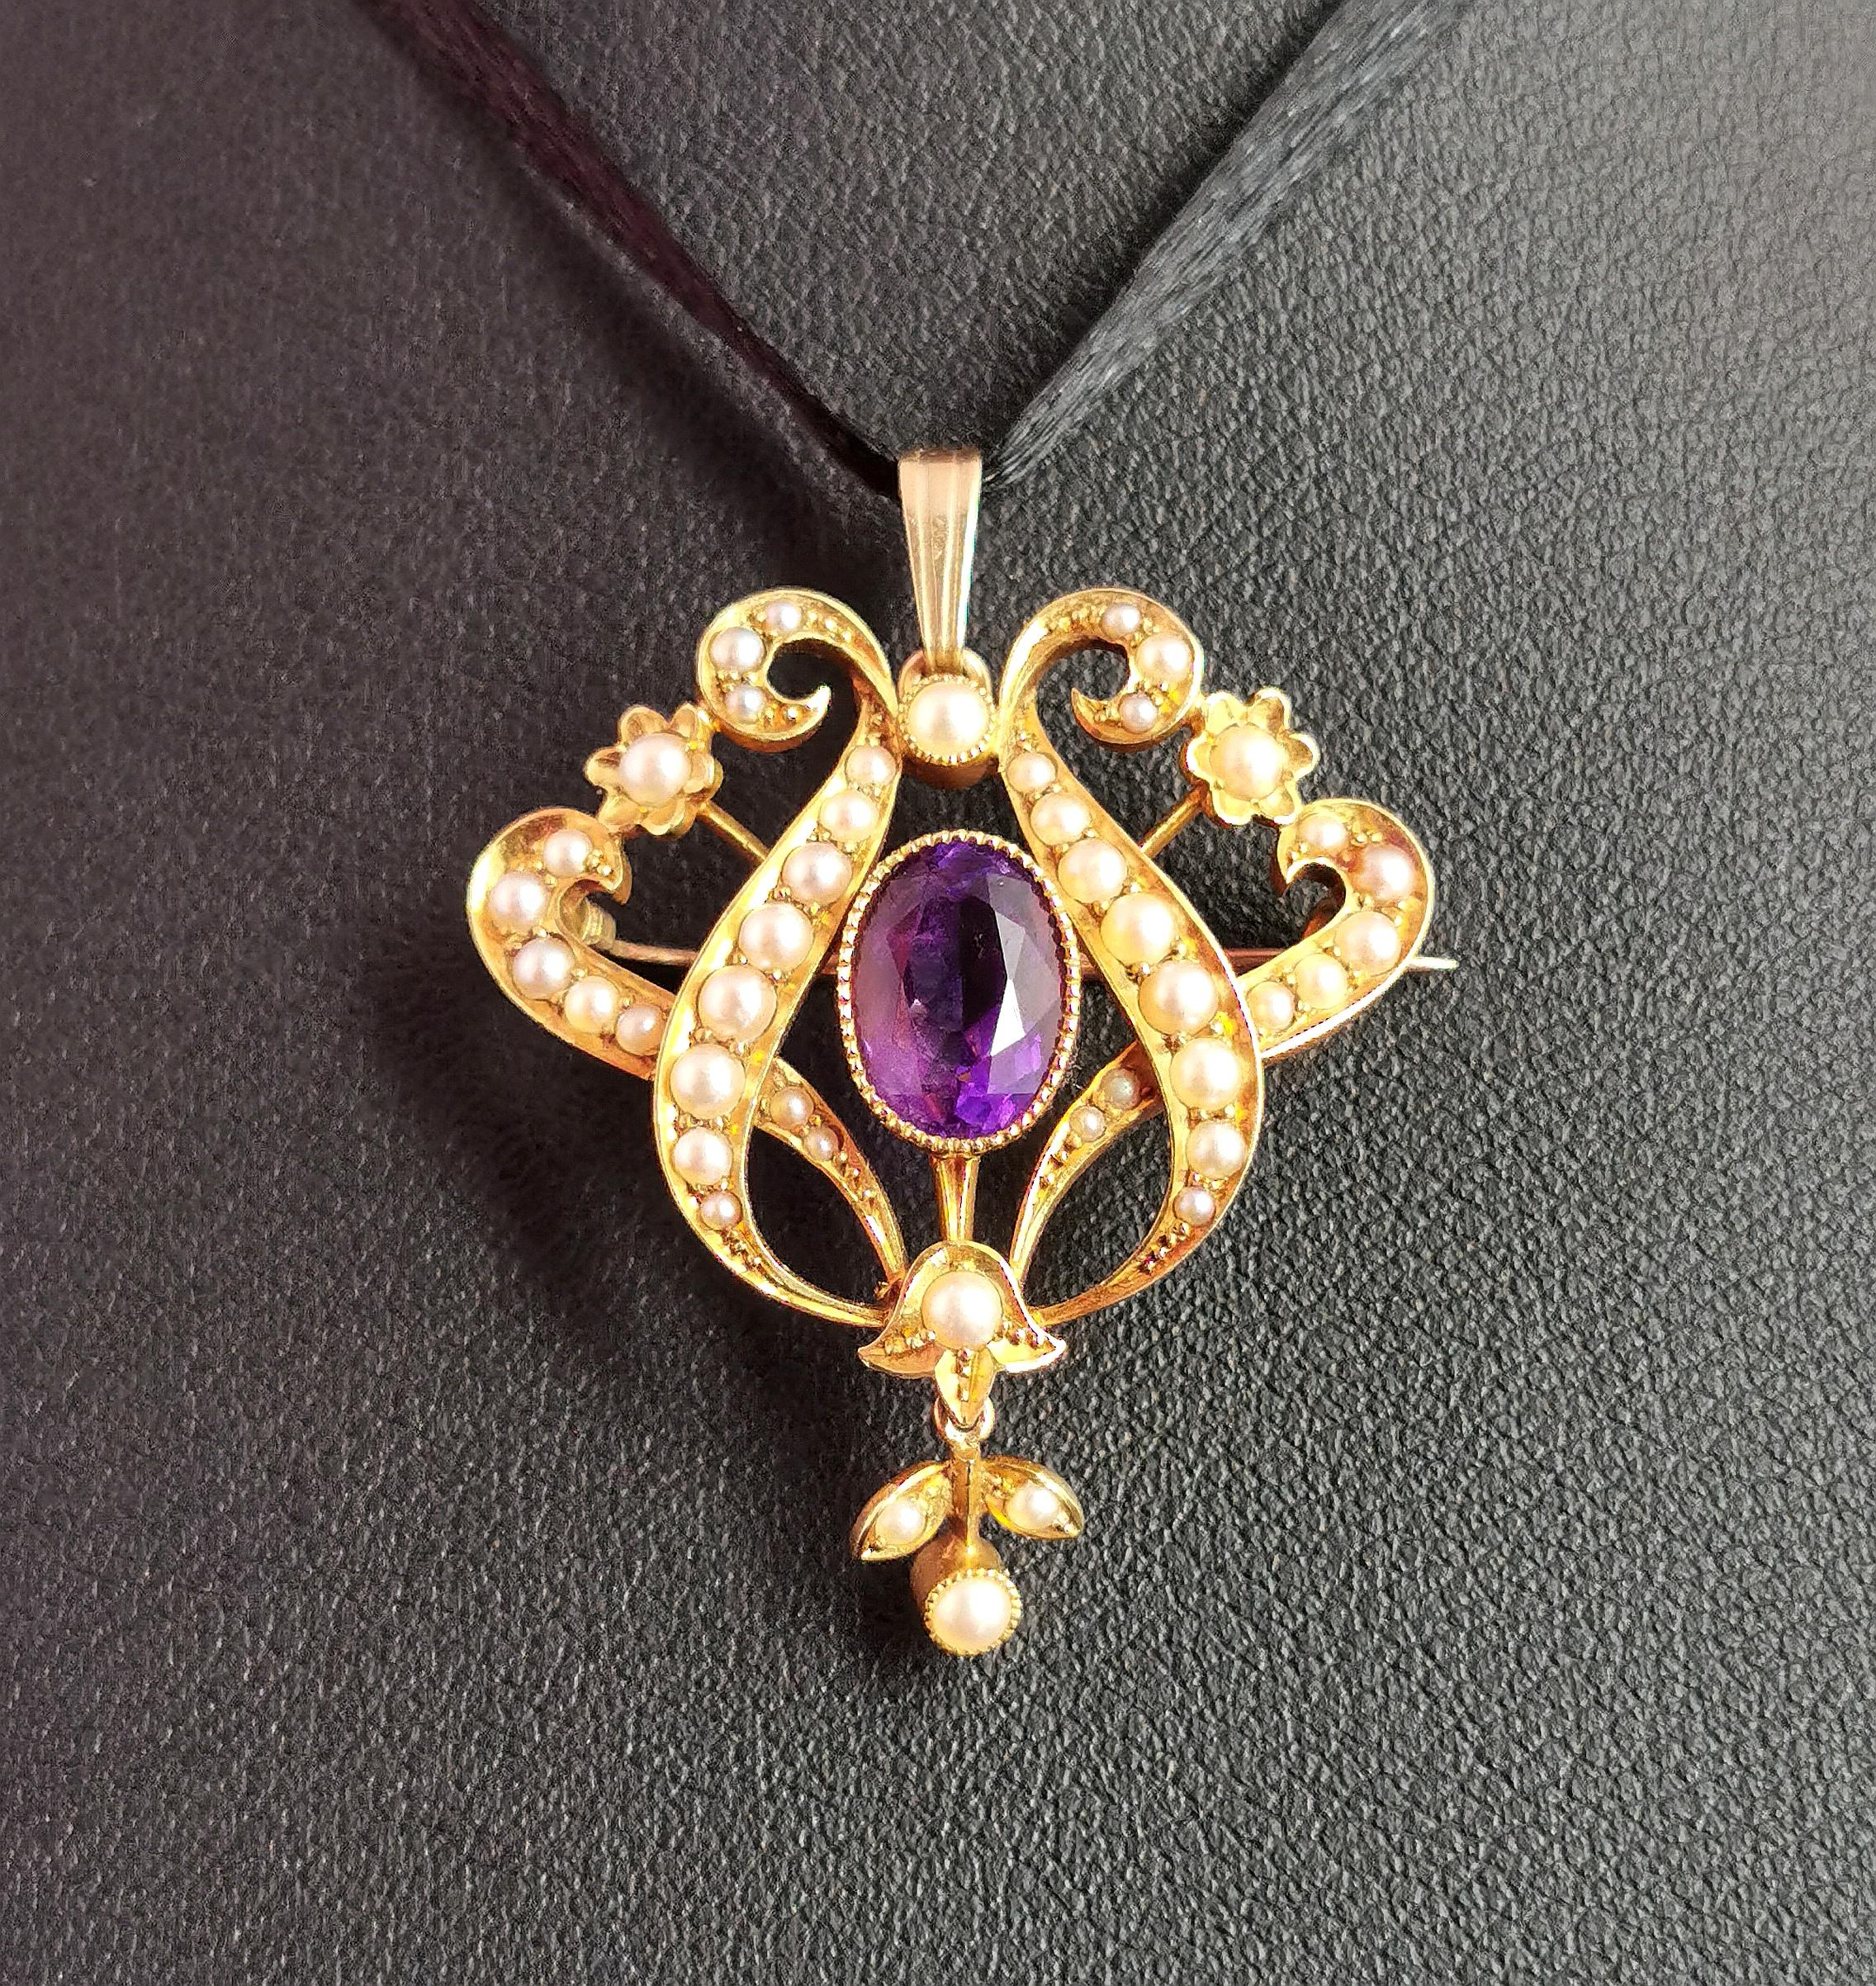 A truly stunning antique Art Nouveau era Amethyst and pearl pendant brooch in 15kt yellow gold.

It is a beautifully crafted pieced, very well made and has an elaborate openwork design in a lyre shape set with creamy seed pearls, to the centre there